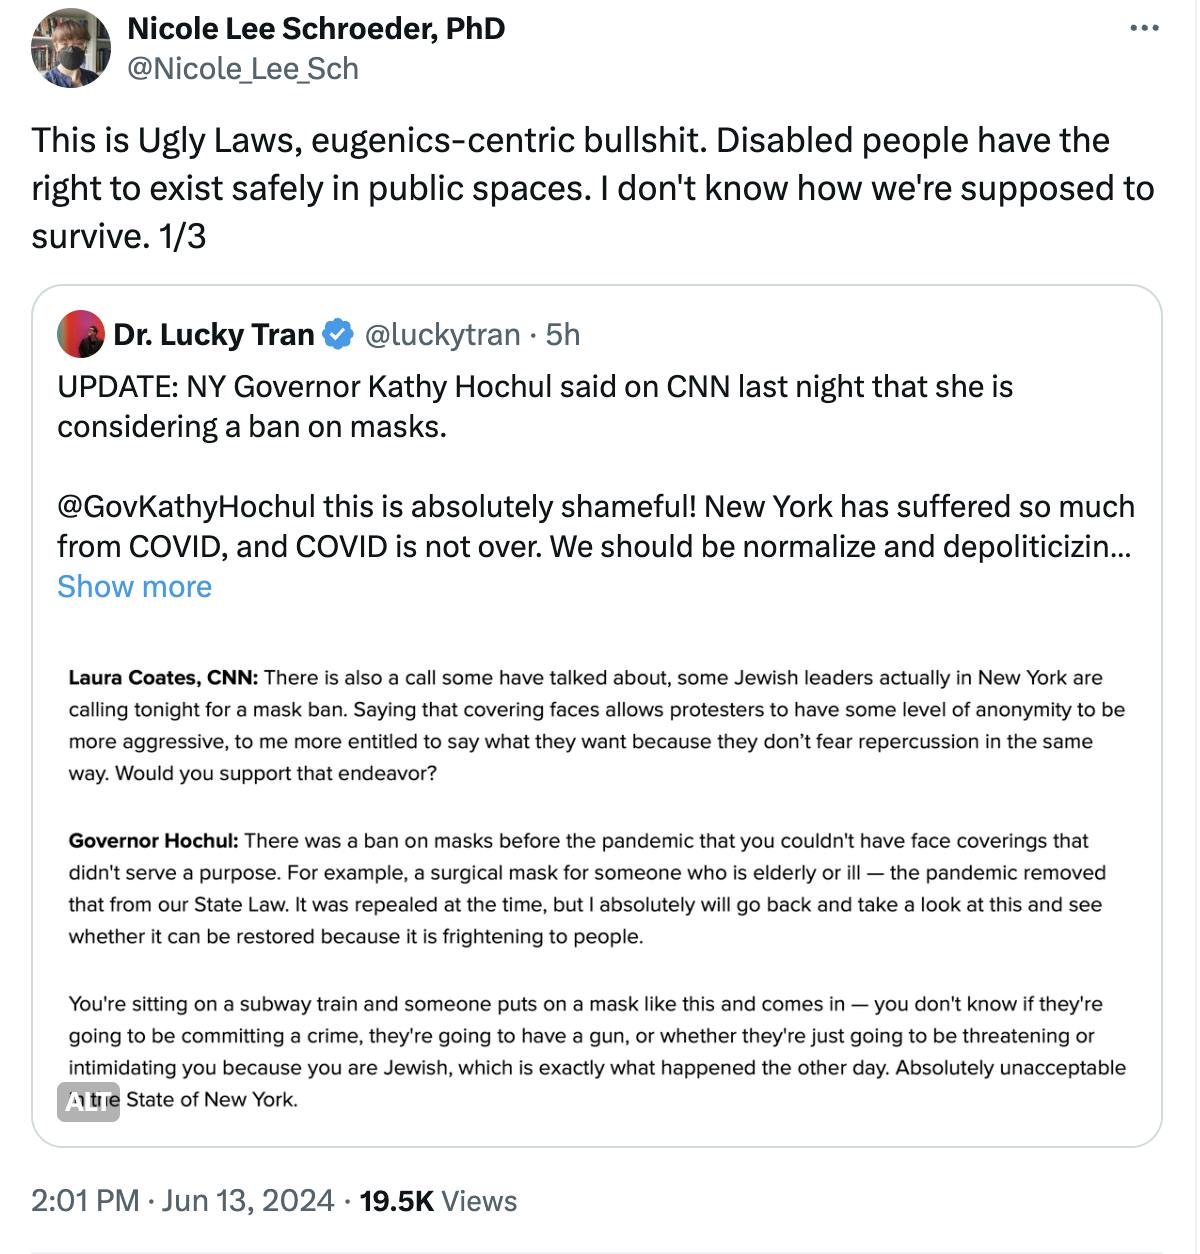 Tweet screenshot Nicole Lee Schroeder, PhD: This is Ugly Laws, eugenics-centric bullshit. Disabled people have the right to exist safely in public spaces. I don't know how we're supposed to survive. 1/3